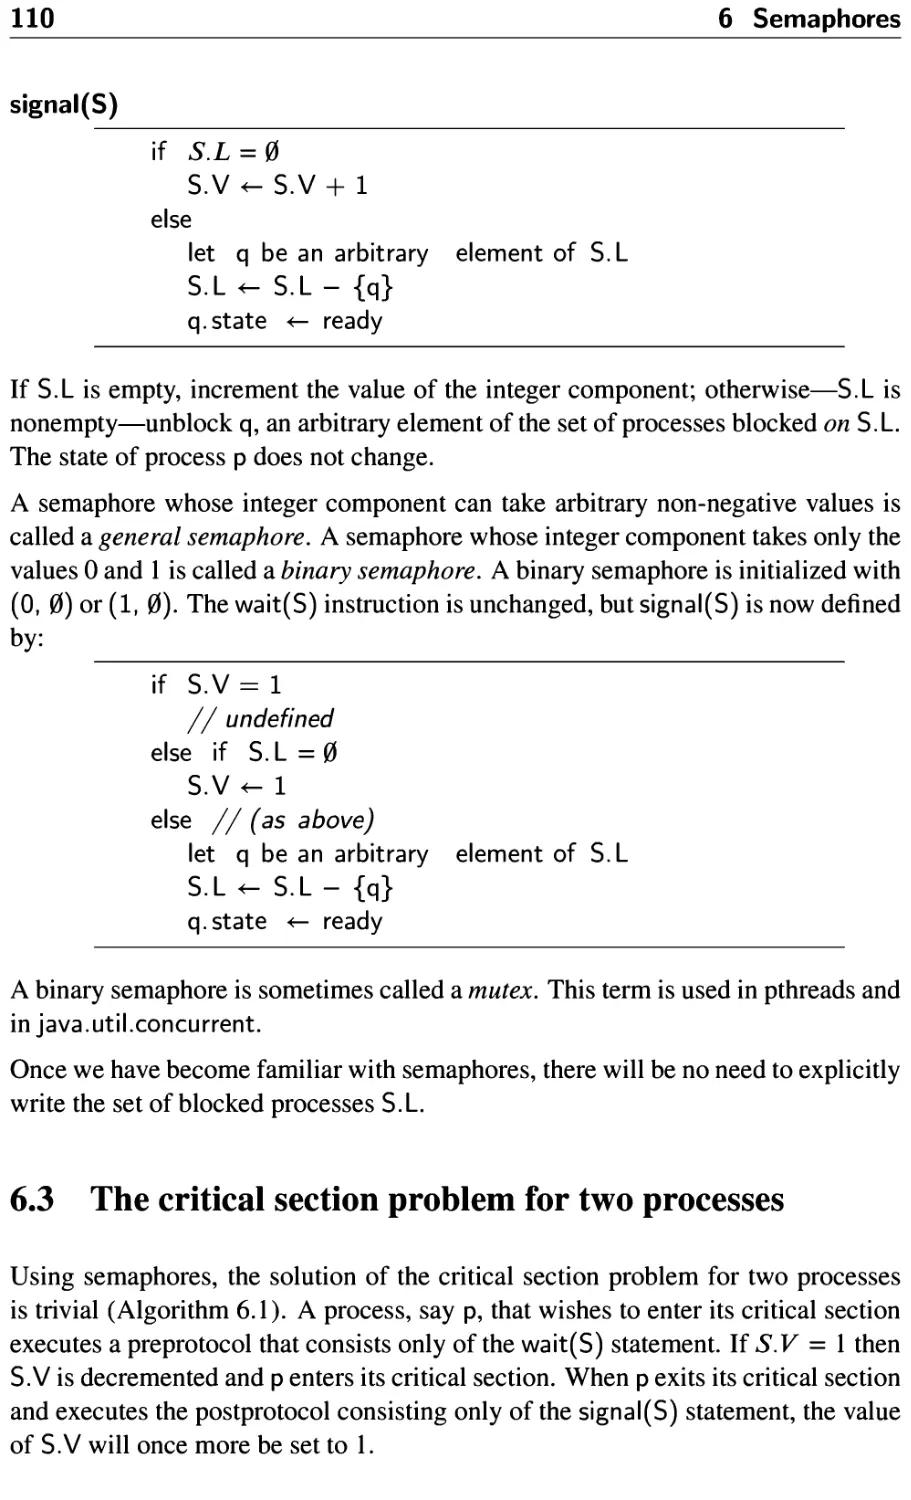 6.3 The critical section problem for two processes